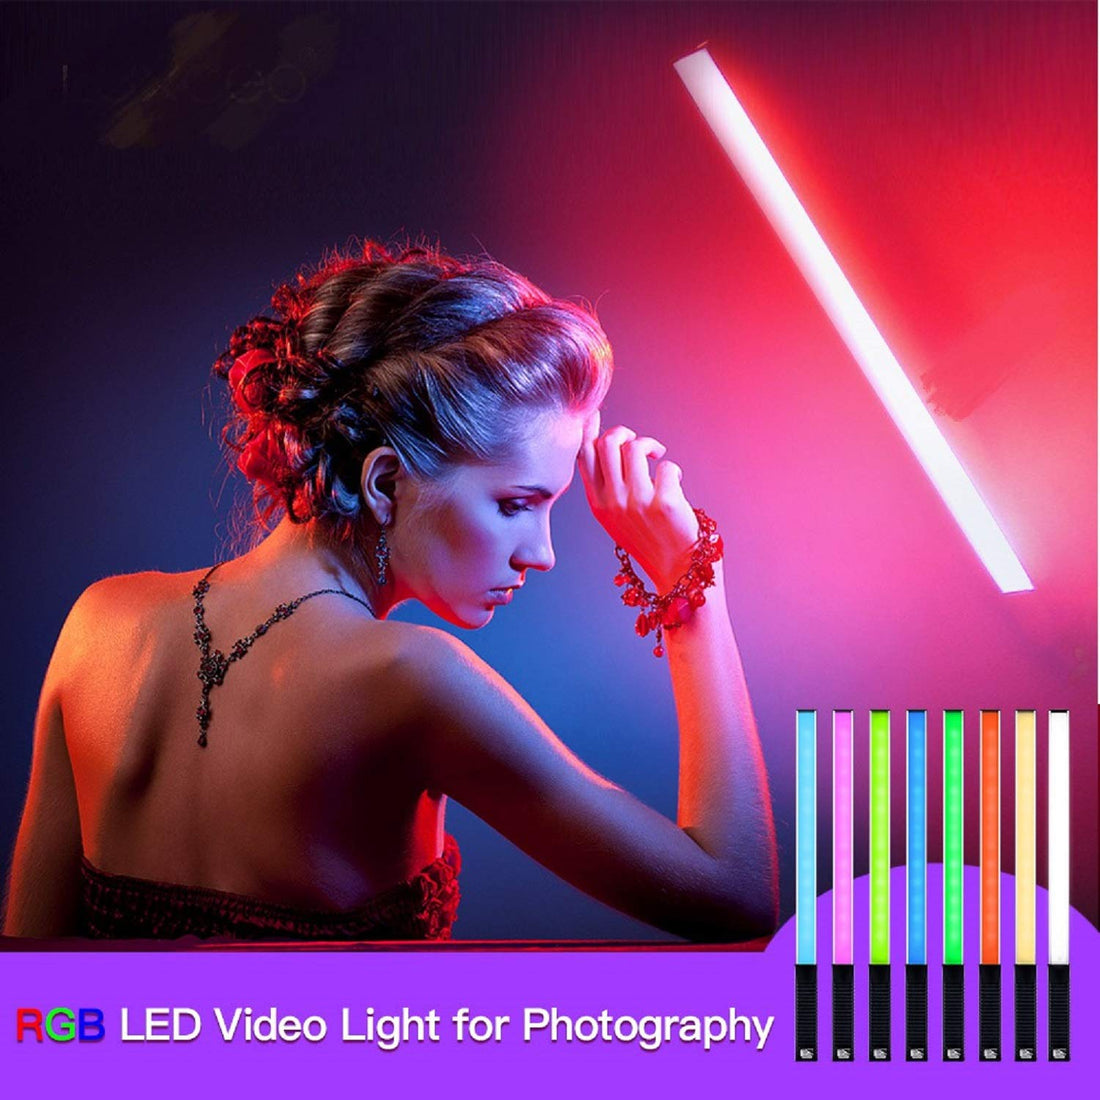 LUXCEO RGB LED Photography Lighting Portable Wand Handheld LED Video Light 1000 Lumens CRI 95+ USB Rechargeable with Remote Control, Carry Bag, Adjustable Color Temperature 3000K-6000K and 8 Colors